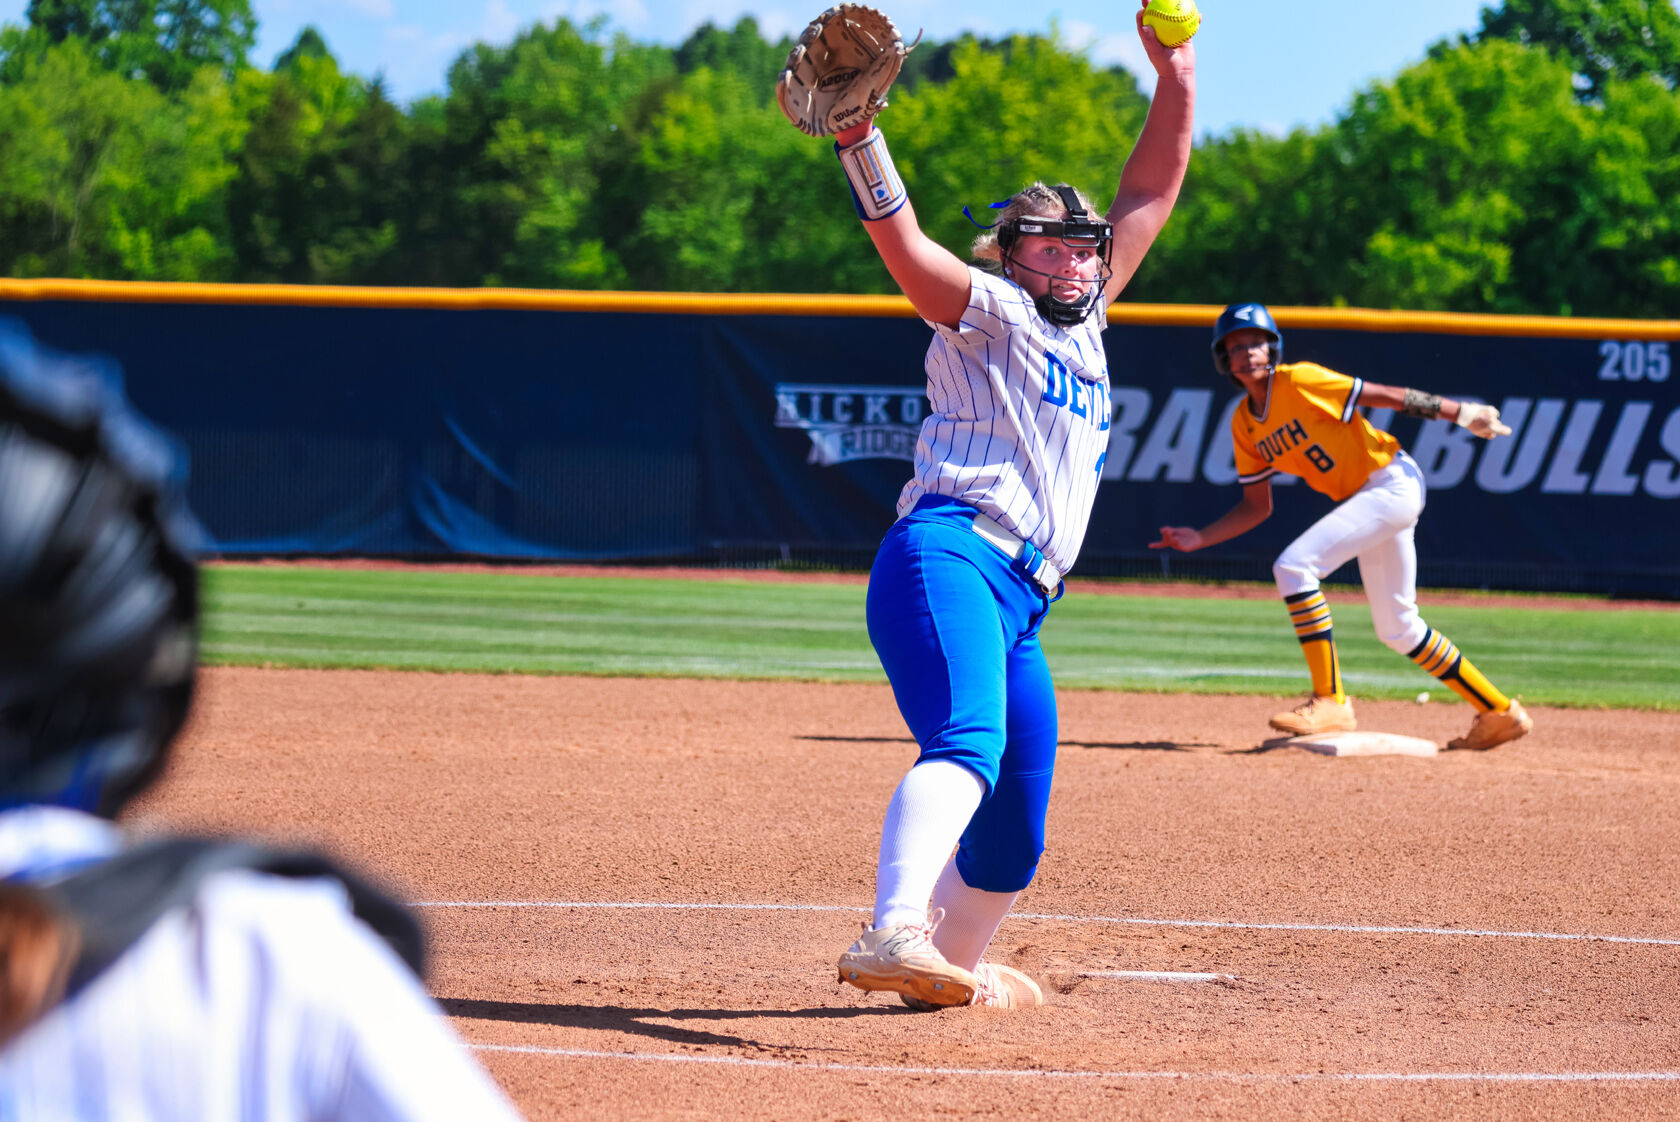 Mooresville to Face Hickory Ridge in Conference Tourney Final After Victory Against South Iredell